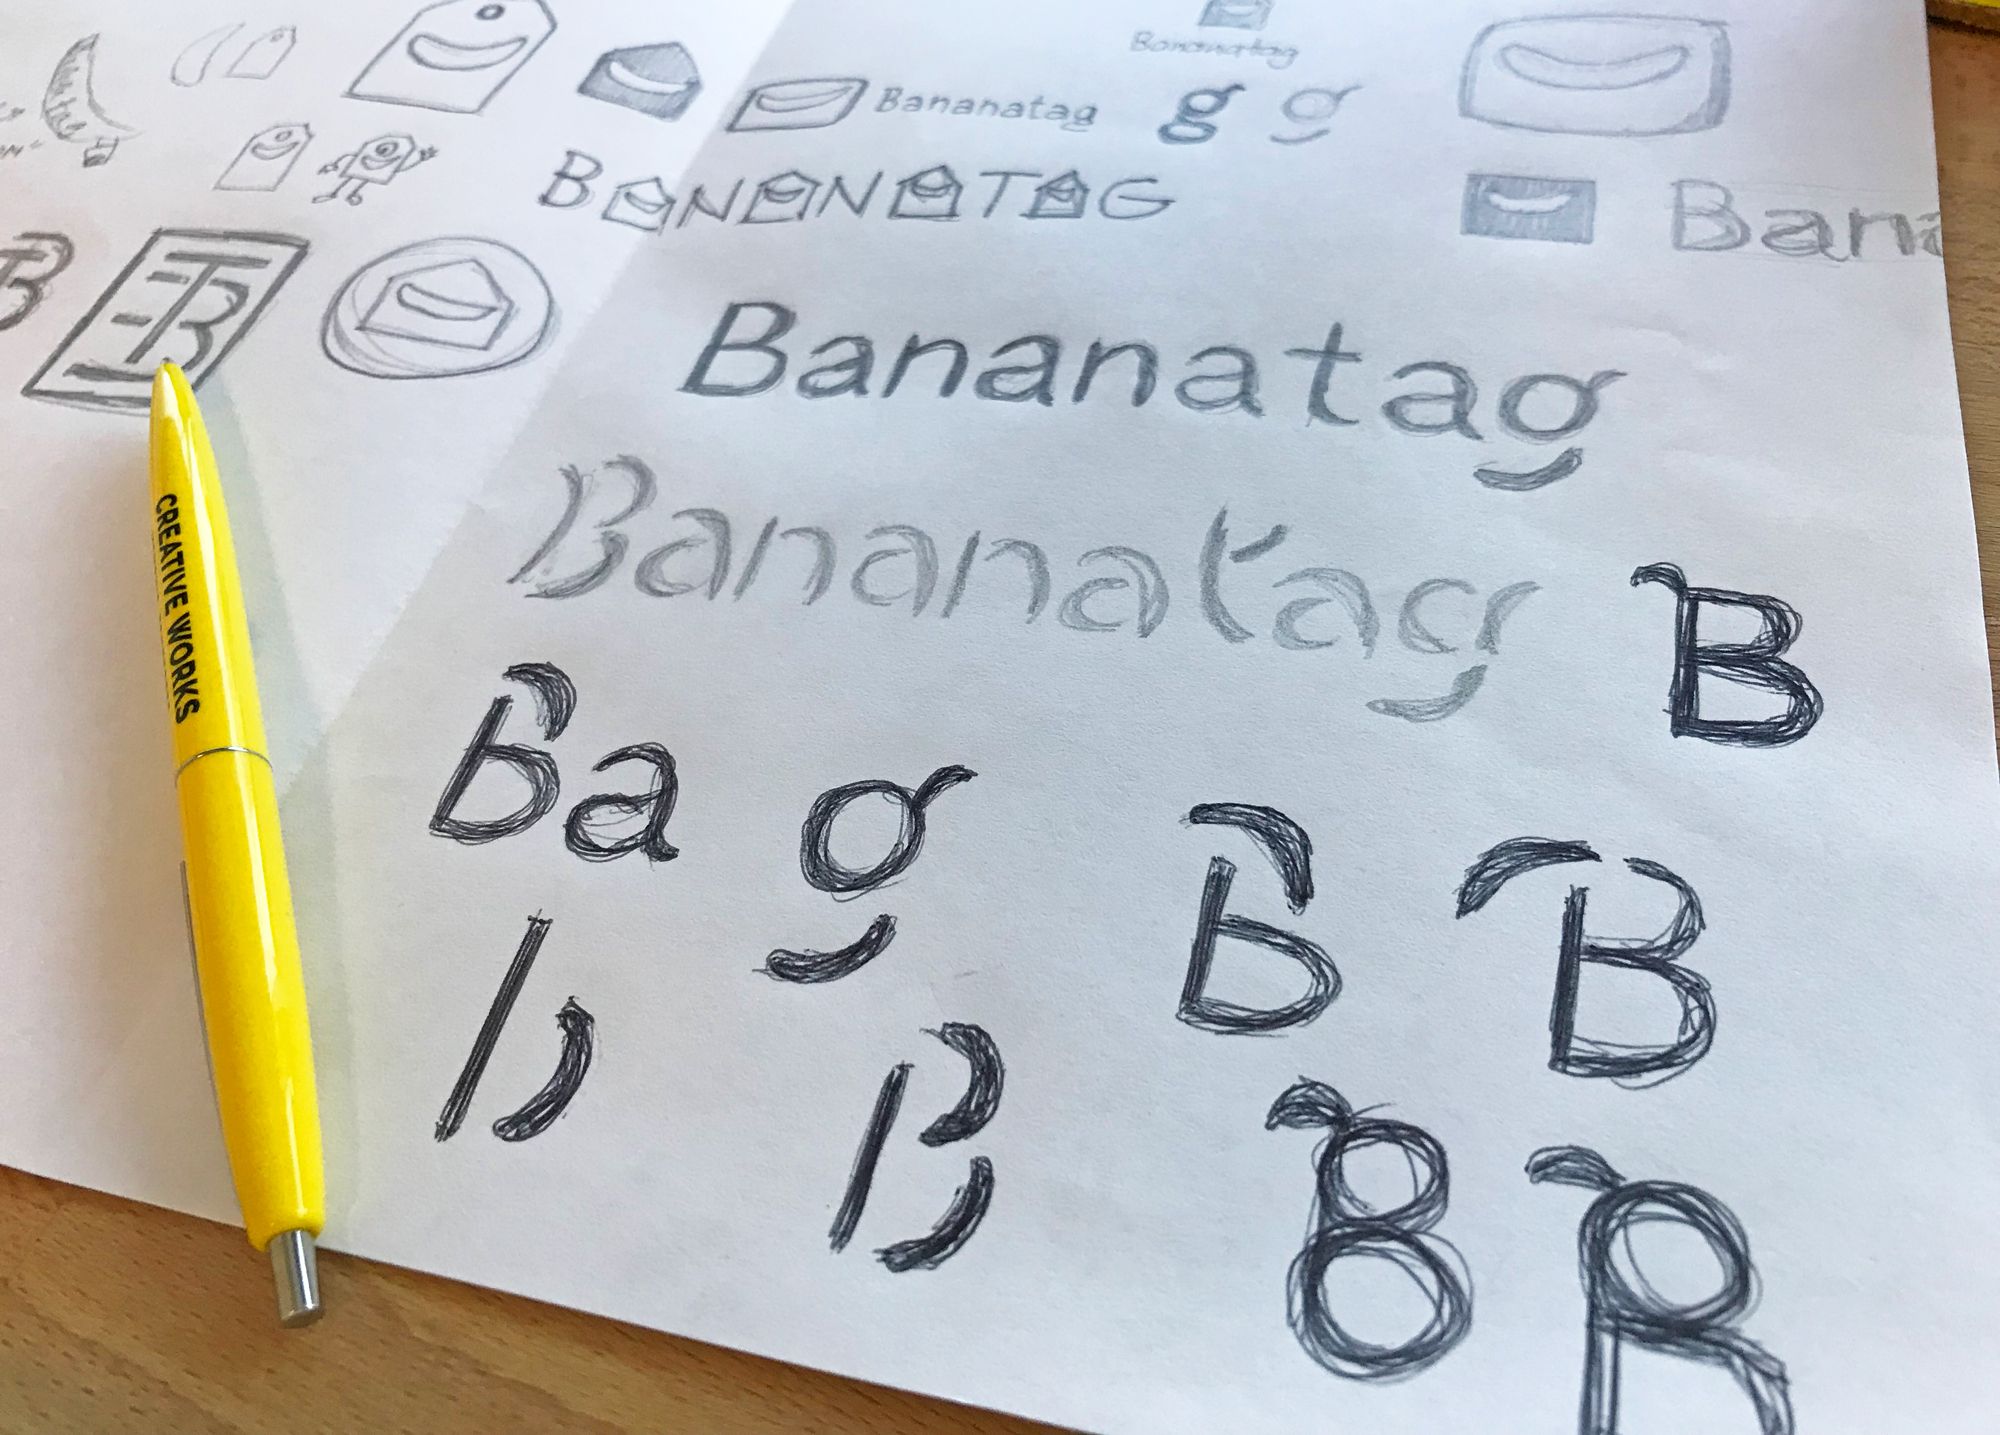 My sketches and design concepts that led to the new Bananatag branding